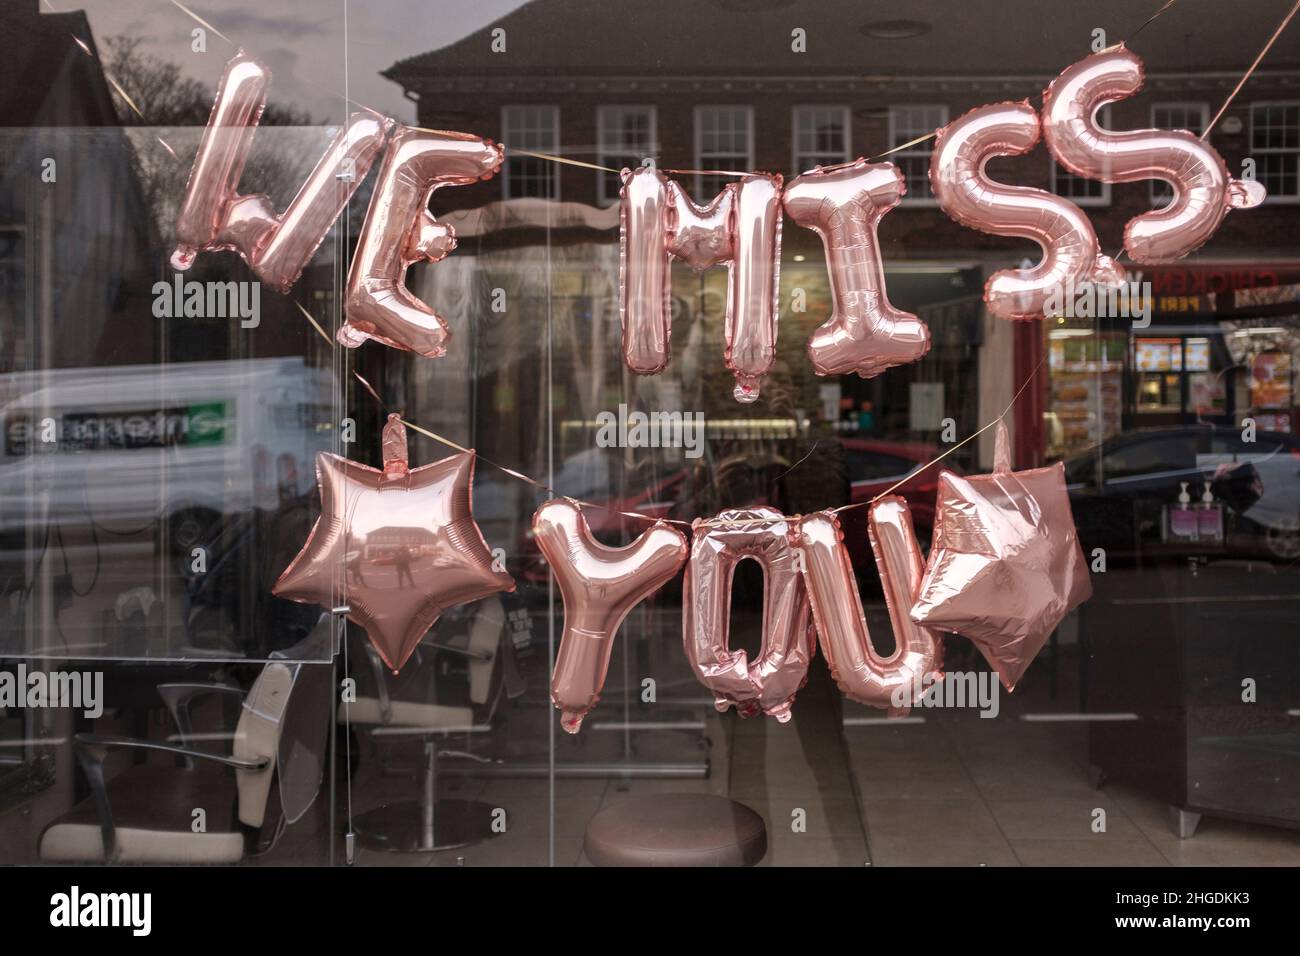 Blow up sign reads 'we miss you' on shop window display during Covid-19 lockdown,London,England Stock Photo